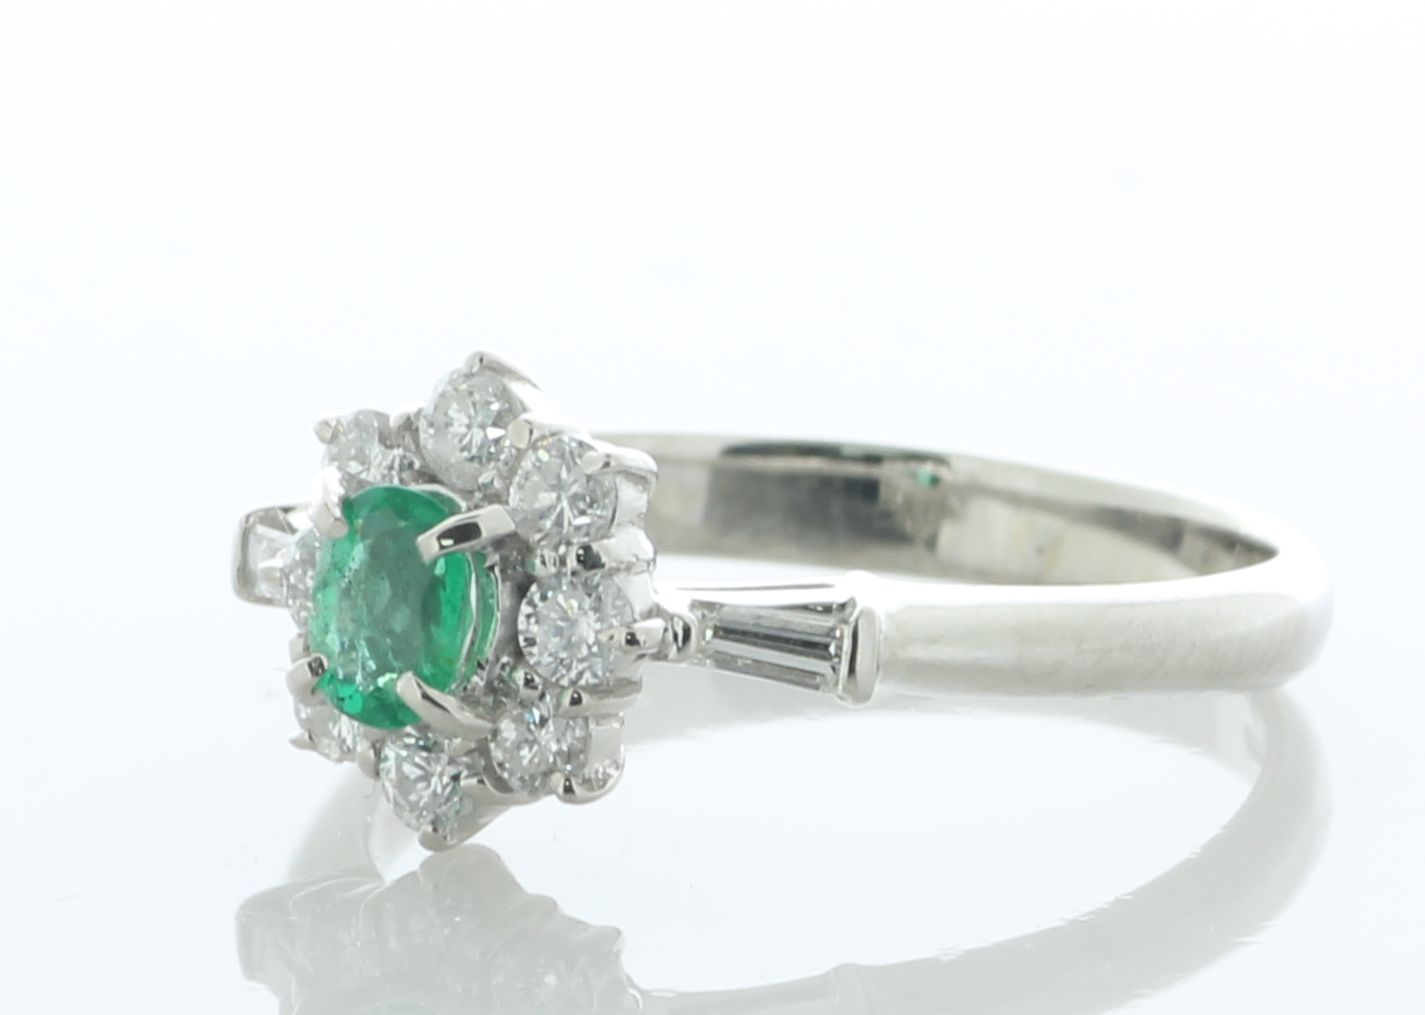 Platinum Oval Cluster Claw Set Diamond and Emerald Ring (E0.28) 0.38 Carats - Image 2 of 5